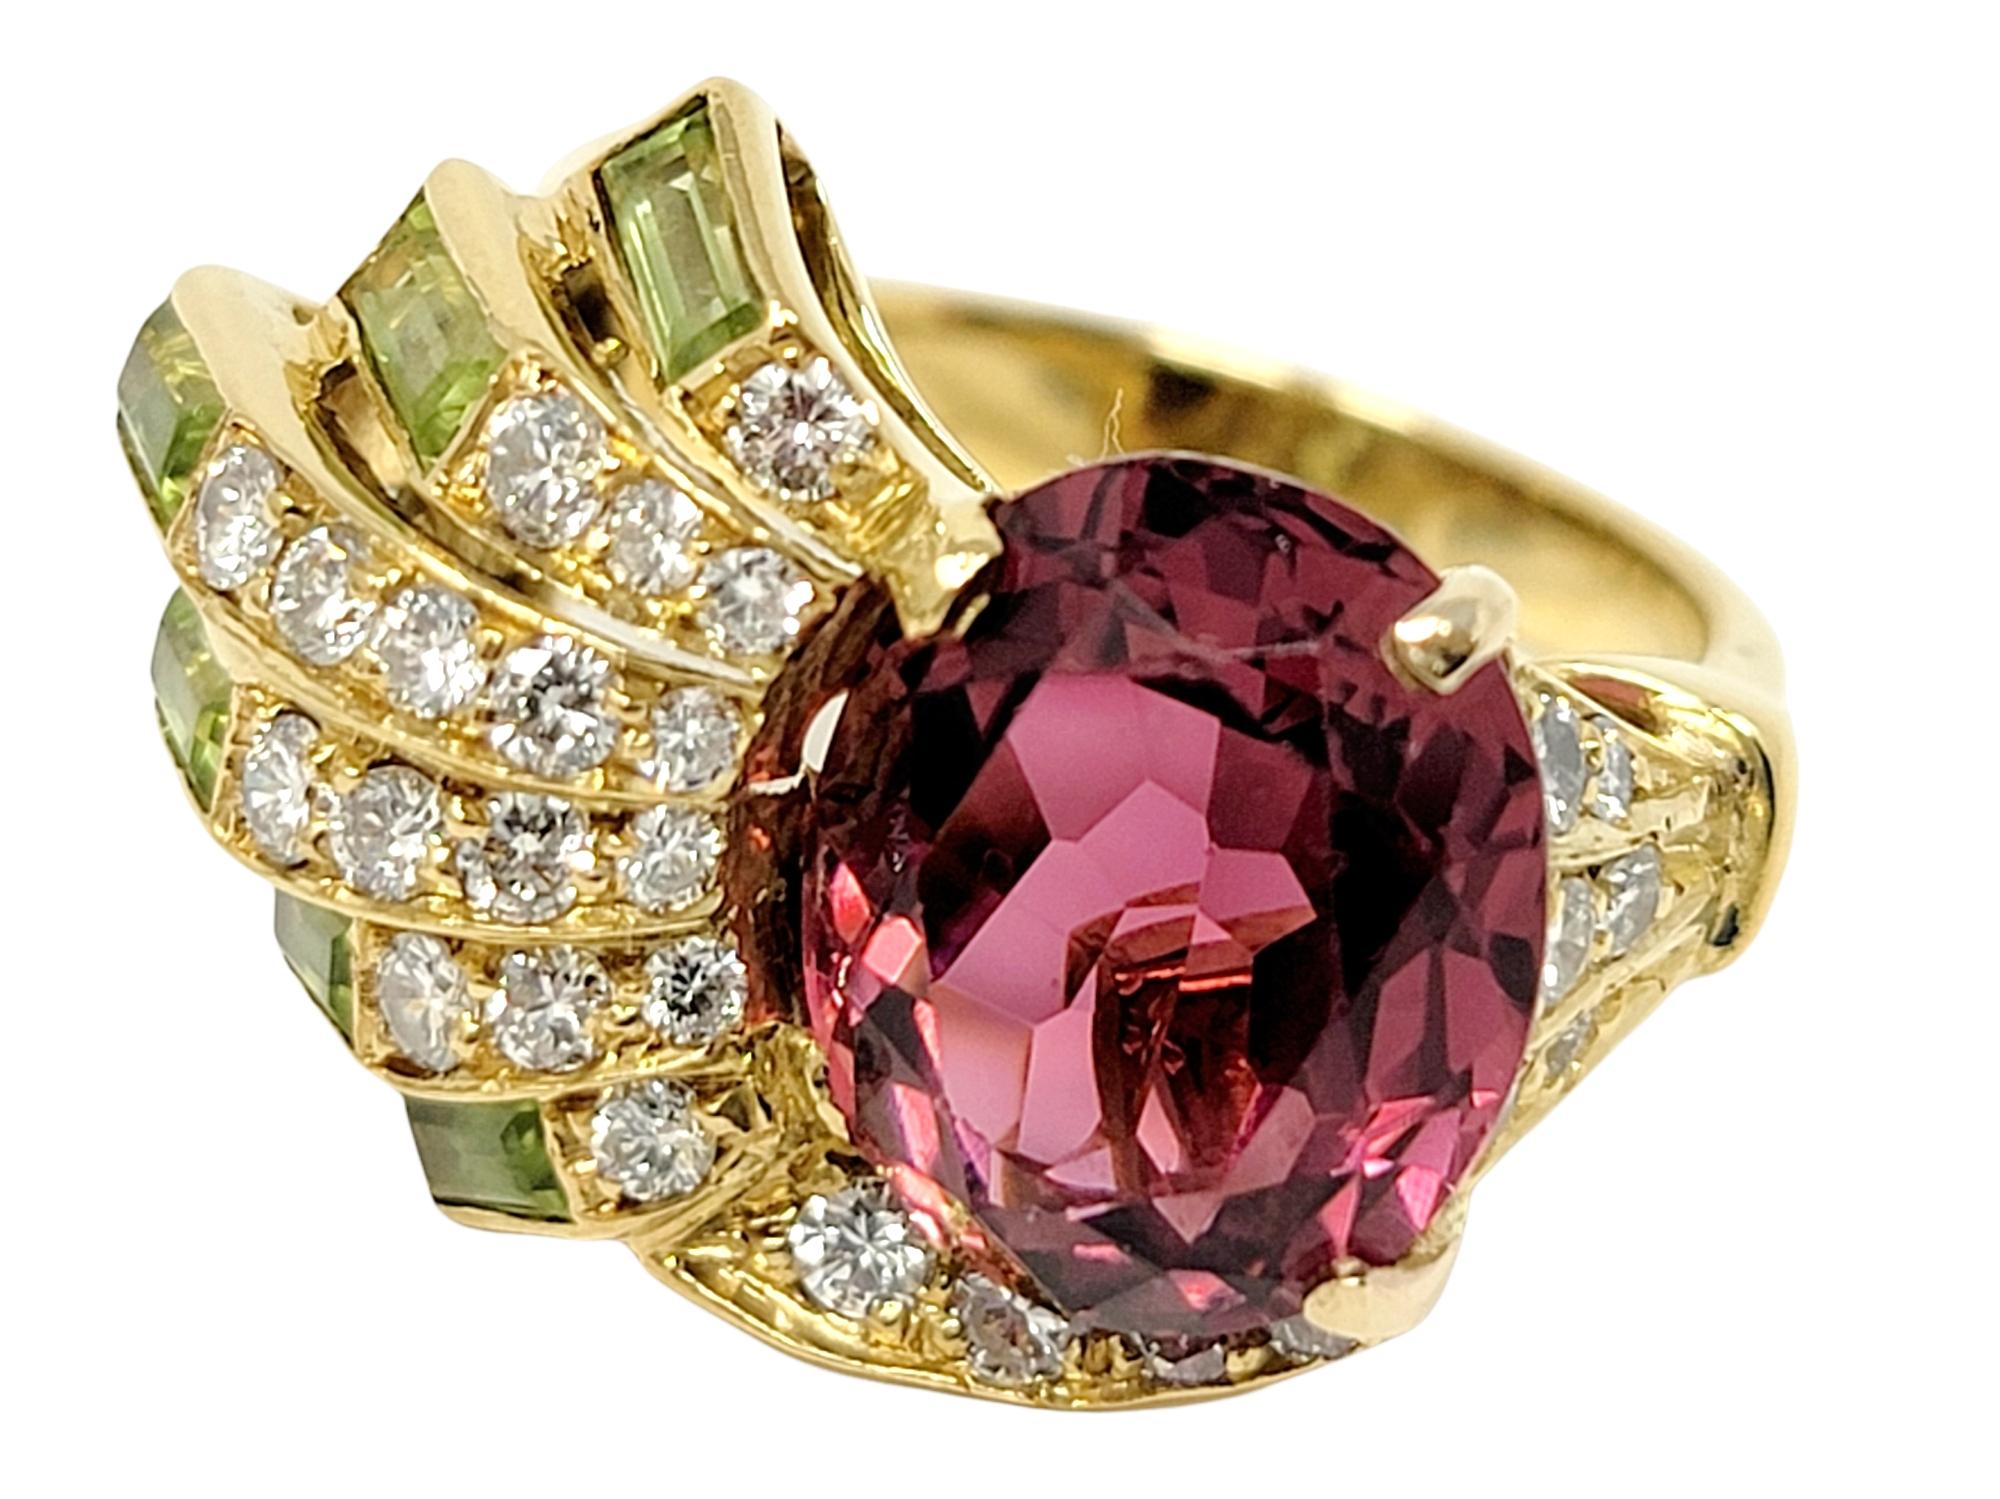 Ring size: 6

Bright and beautiful multi-gemstone ring featuring pink tourmaline, diamonds and peridots by Sabbadini. Set in an asymmetrical layout, the sizeable oval pink stone is accented by a sparkling spray of diamonds and peridot, filling the